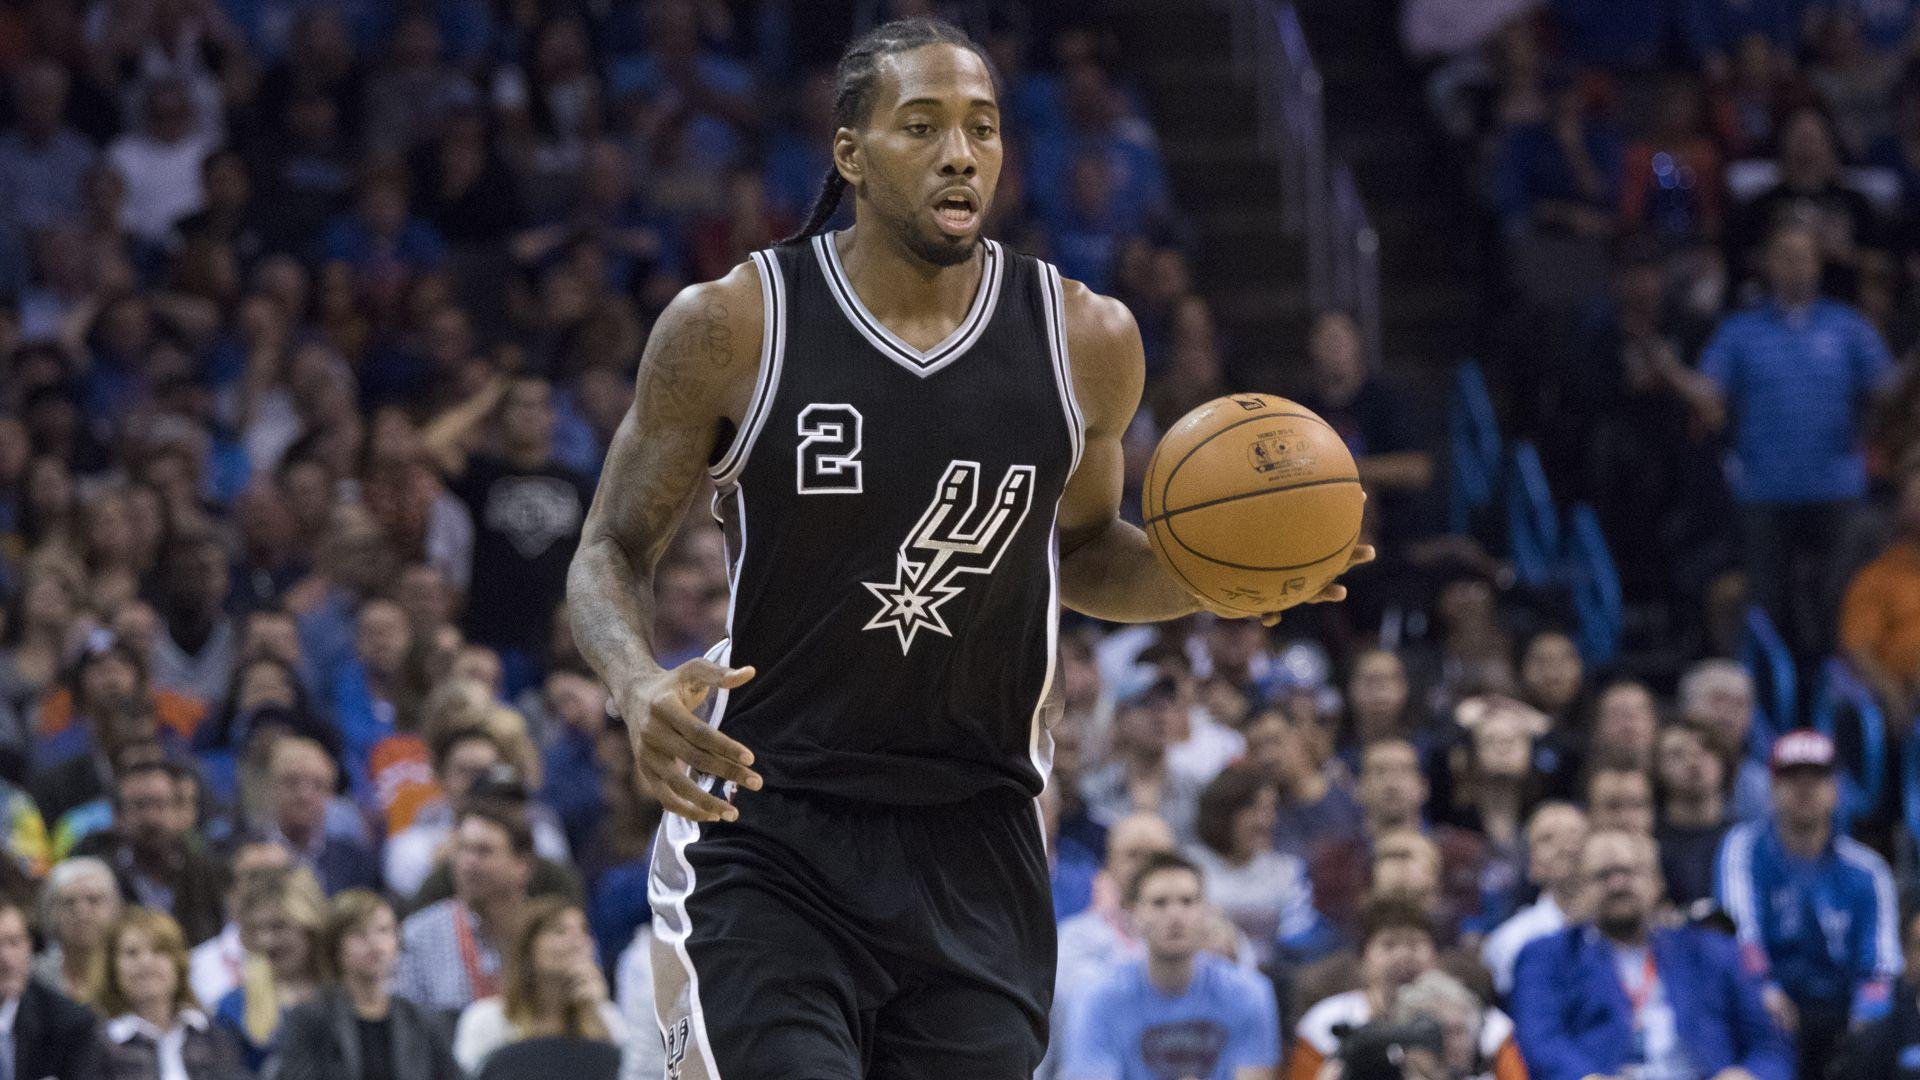 Kawhi Leonard drives 1997 Chevy, hoards coupons for chicken wings